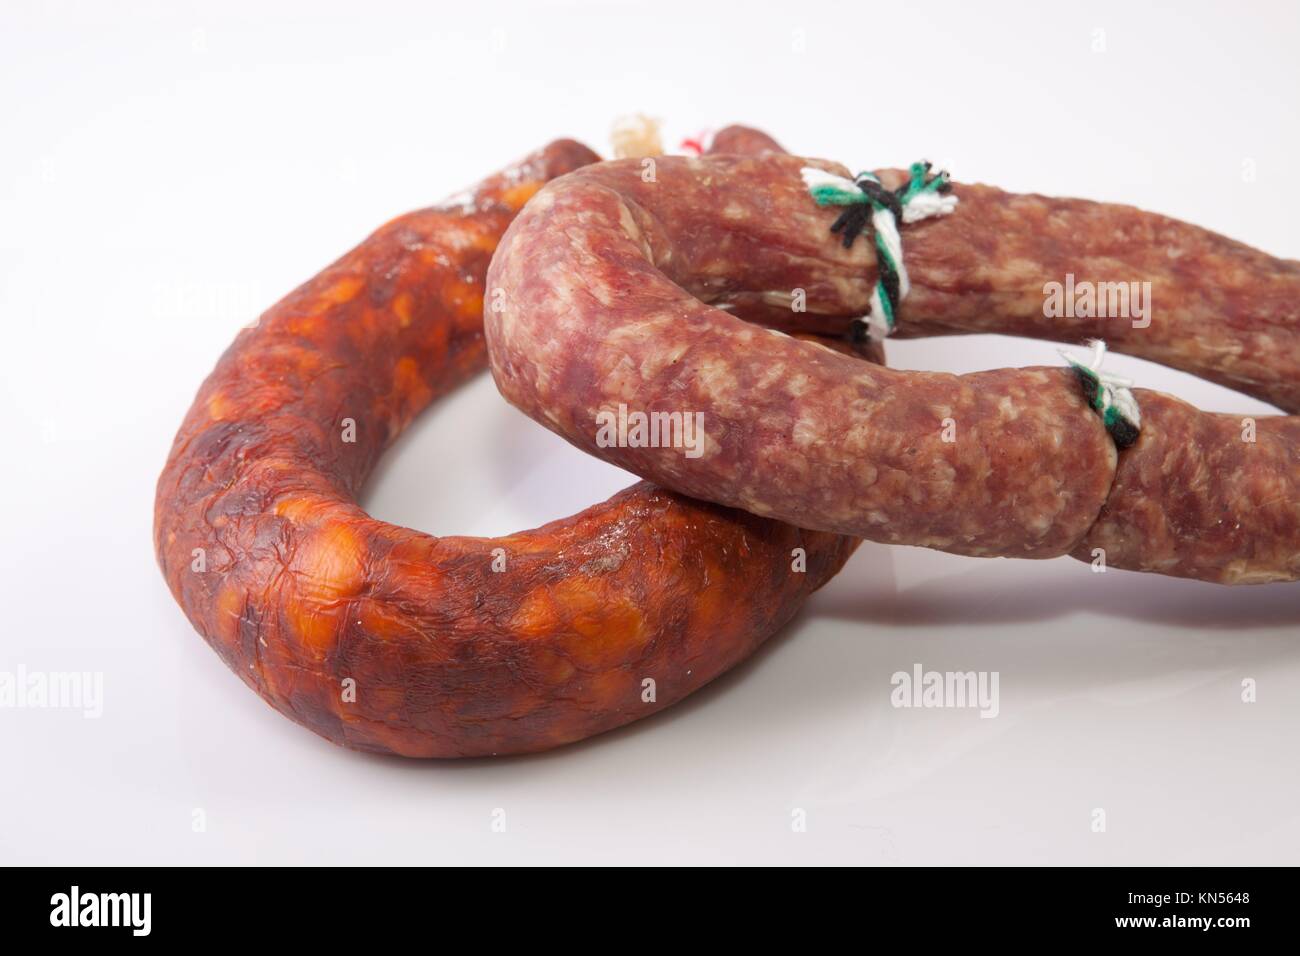 Red and white iberian salchichon. Isolated over white background. Stock Photo